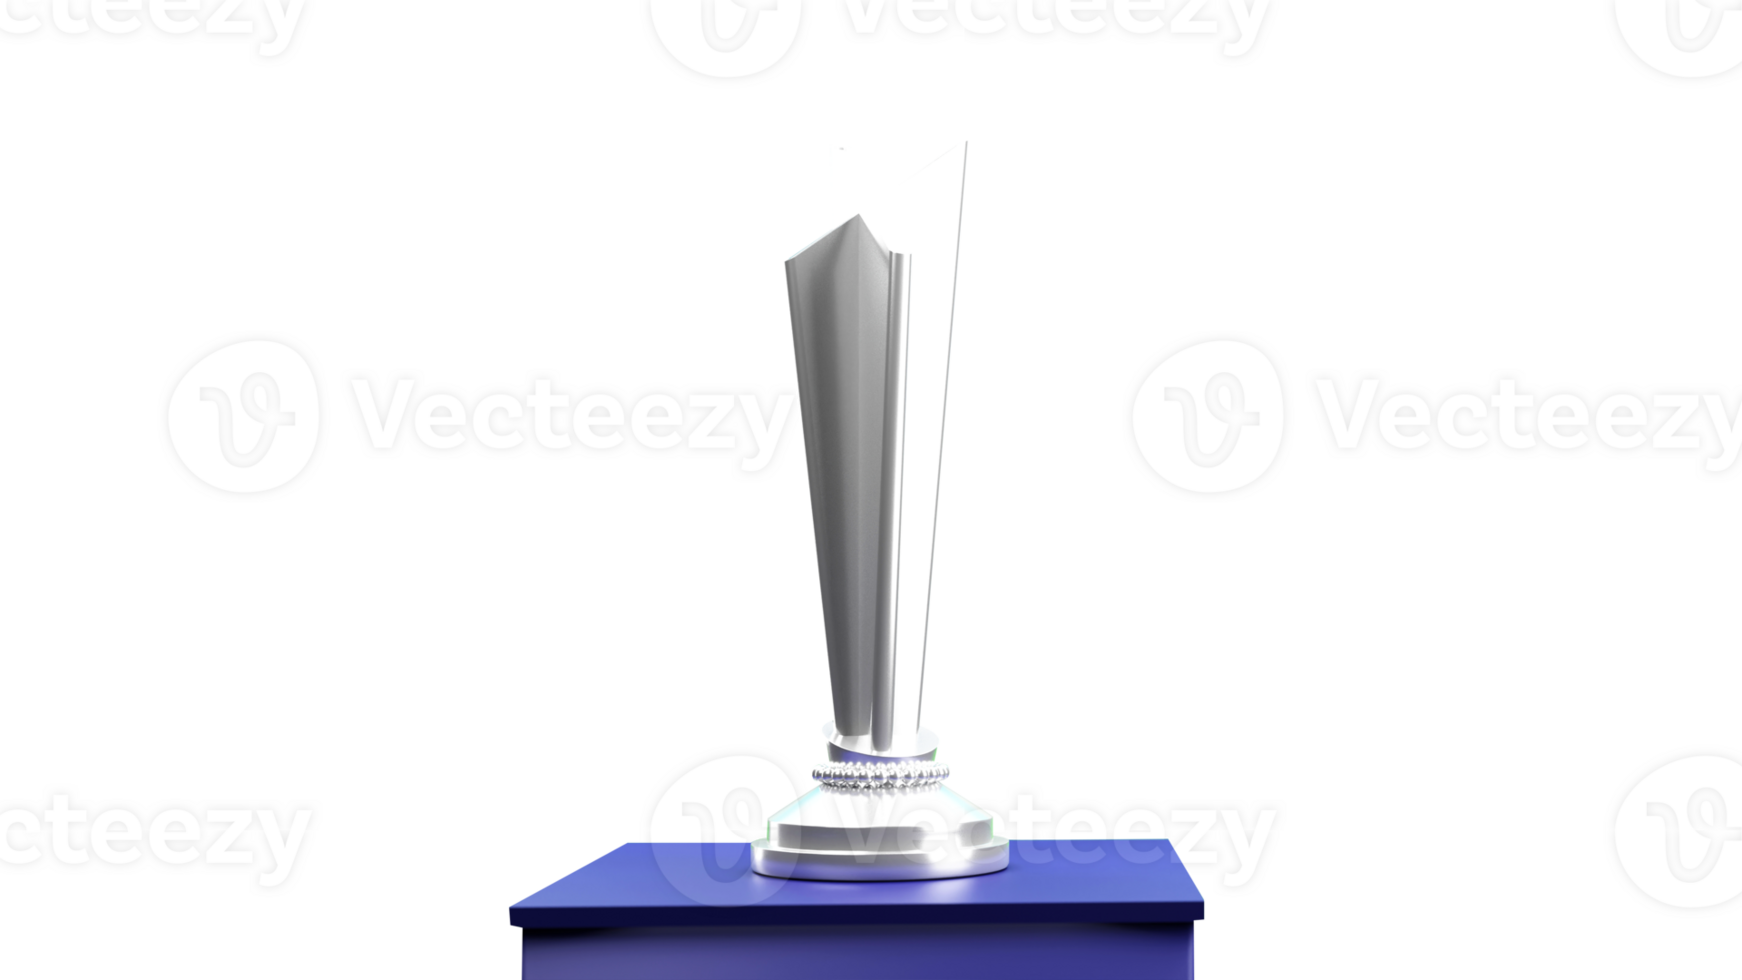 3D Silver Trophy Cup At Podium On White Background. png